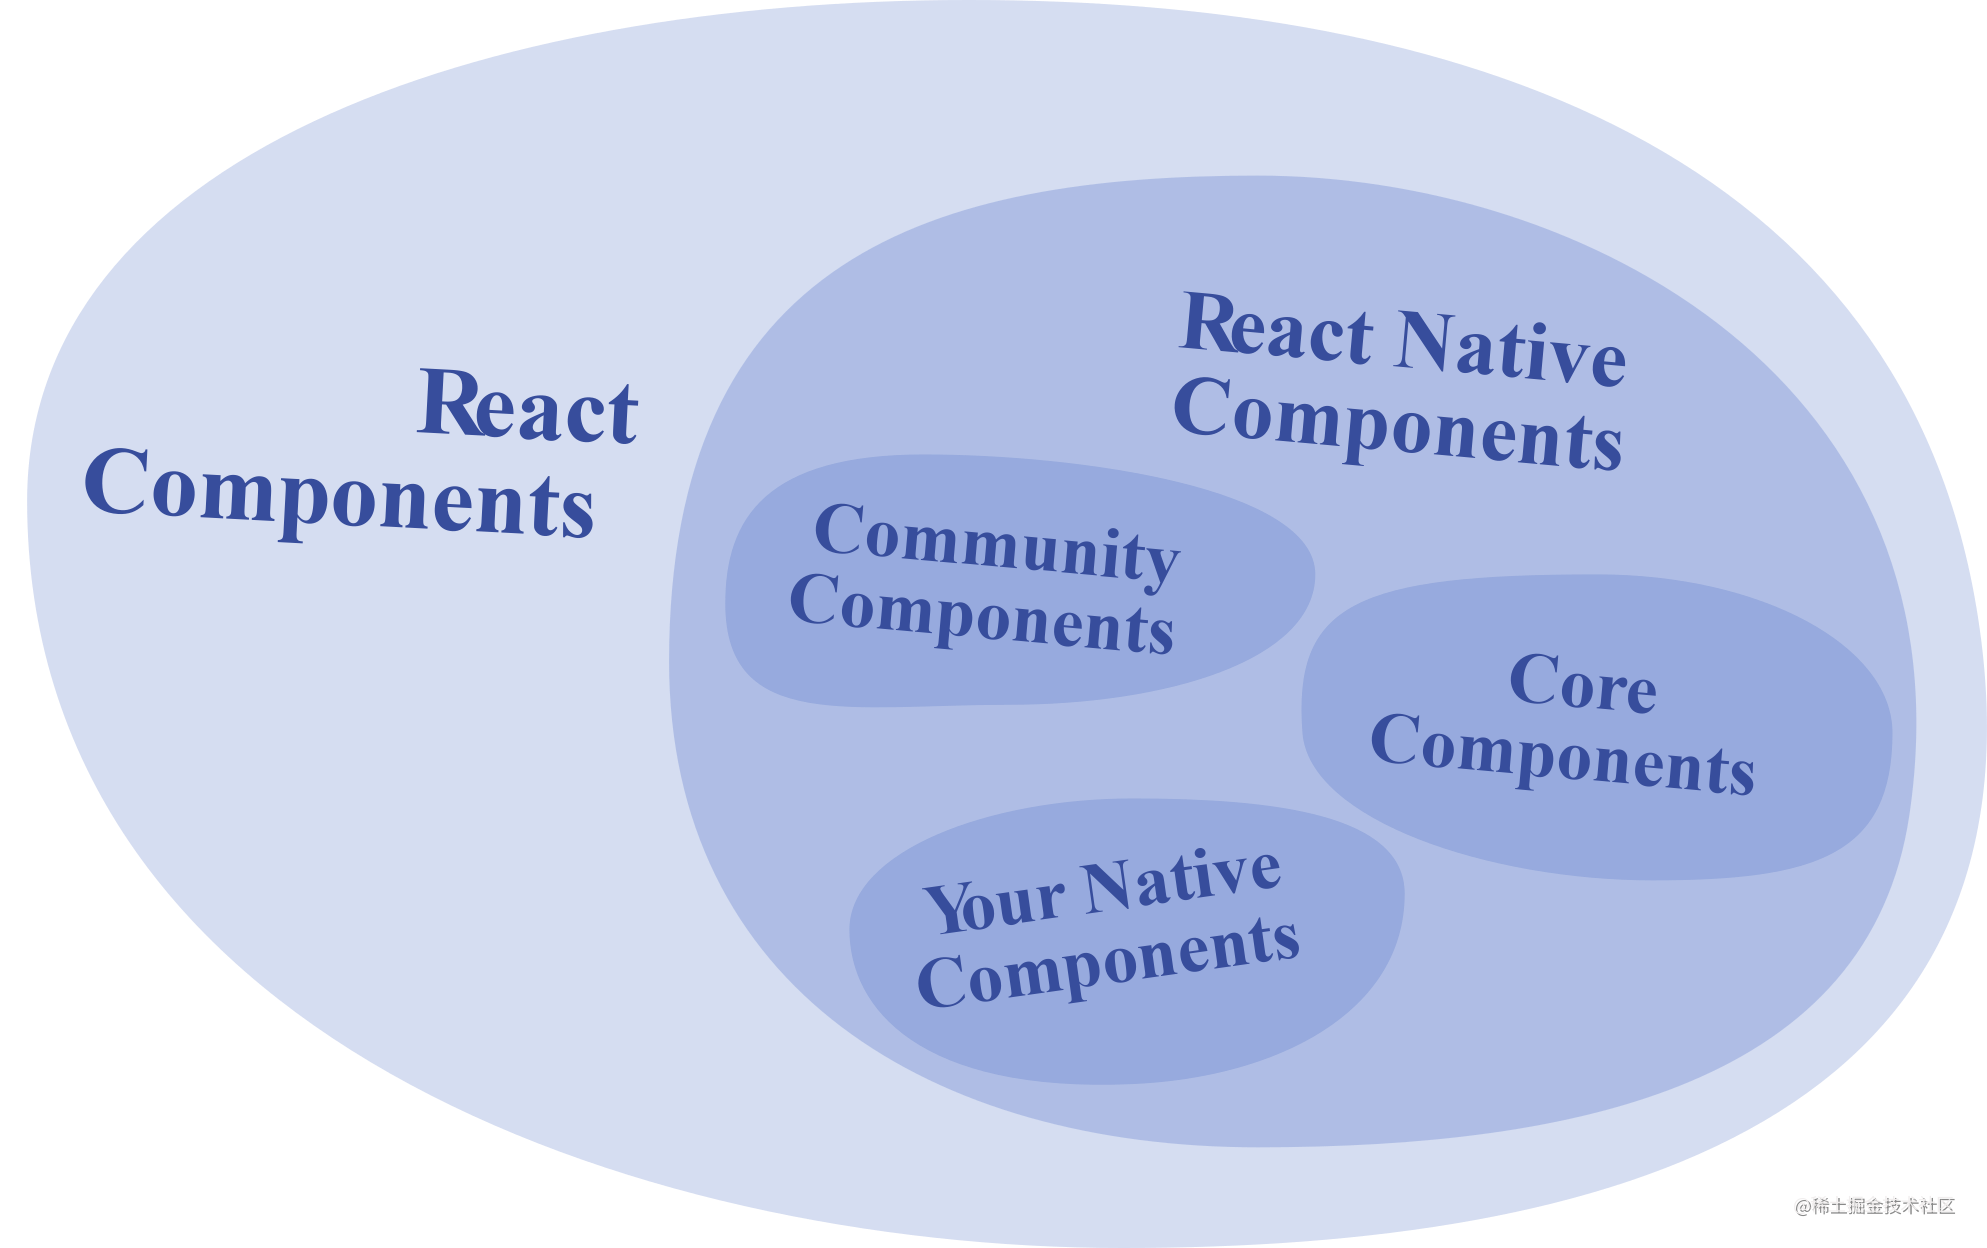 A diagram showing React Native's Core Components are a subset of React Components that ship with React Native.